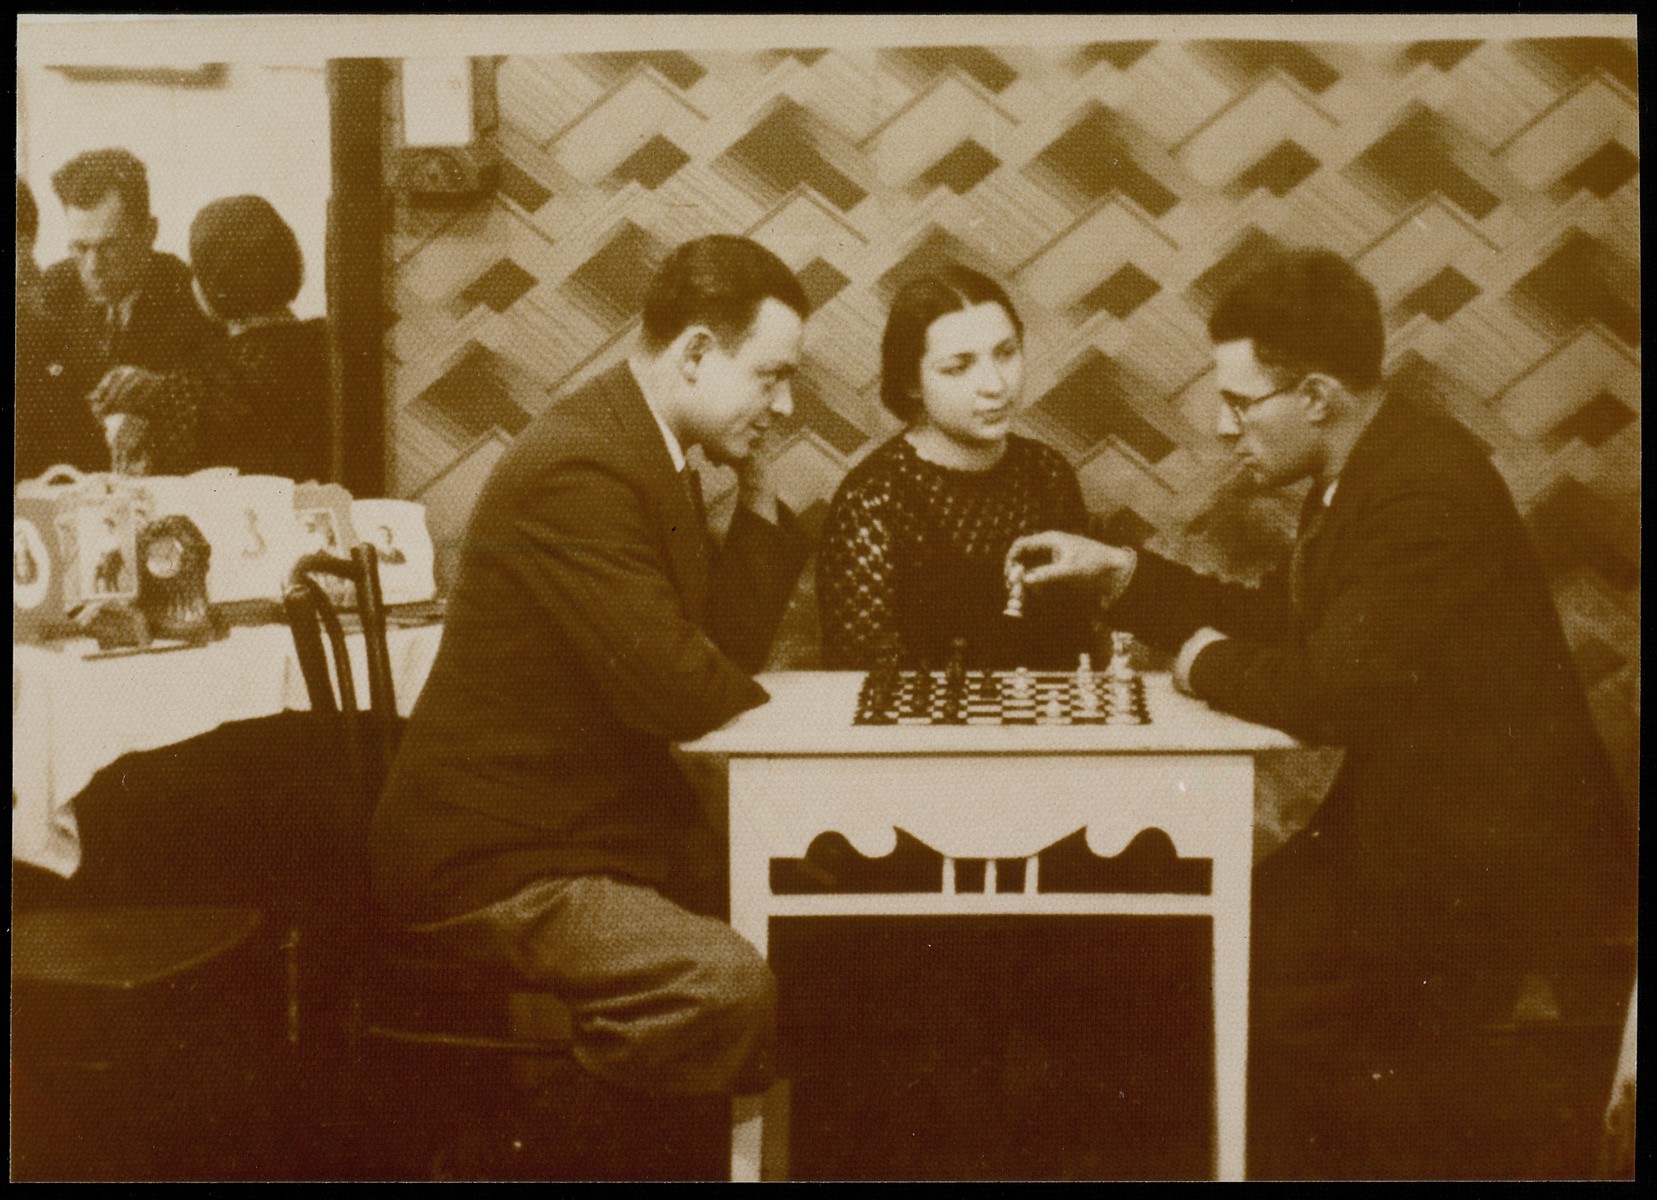 Two men play chess while Malka Matikanski looks on.

Malka Matikanski sitting in the center and Velvke Kaganowicz is on the right.  The man on the left is unidentified.  The photograph was taken in the photographer's house on Vilna Street.

Malka Matikanski  immigrated to Palestine.  Velvke Kaganowicz, his wife and children were murdered by the Germans during the September 1941 killing action in Eisiskes.